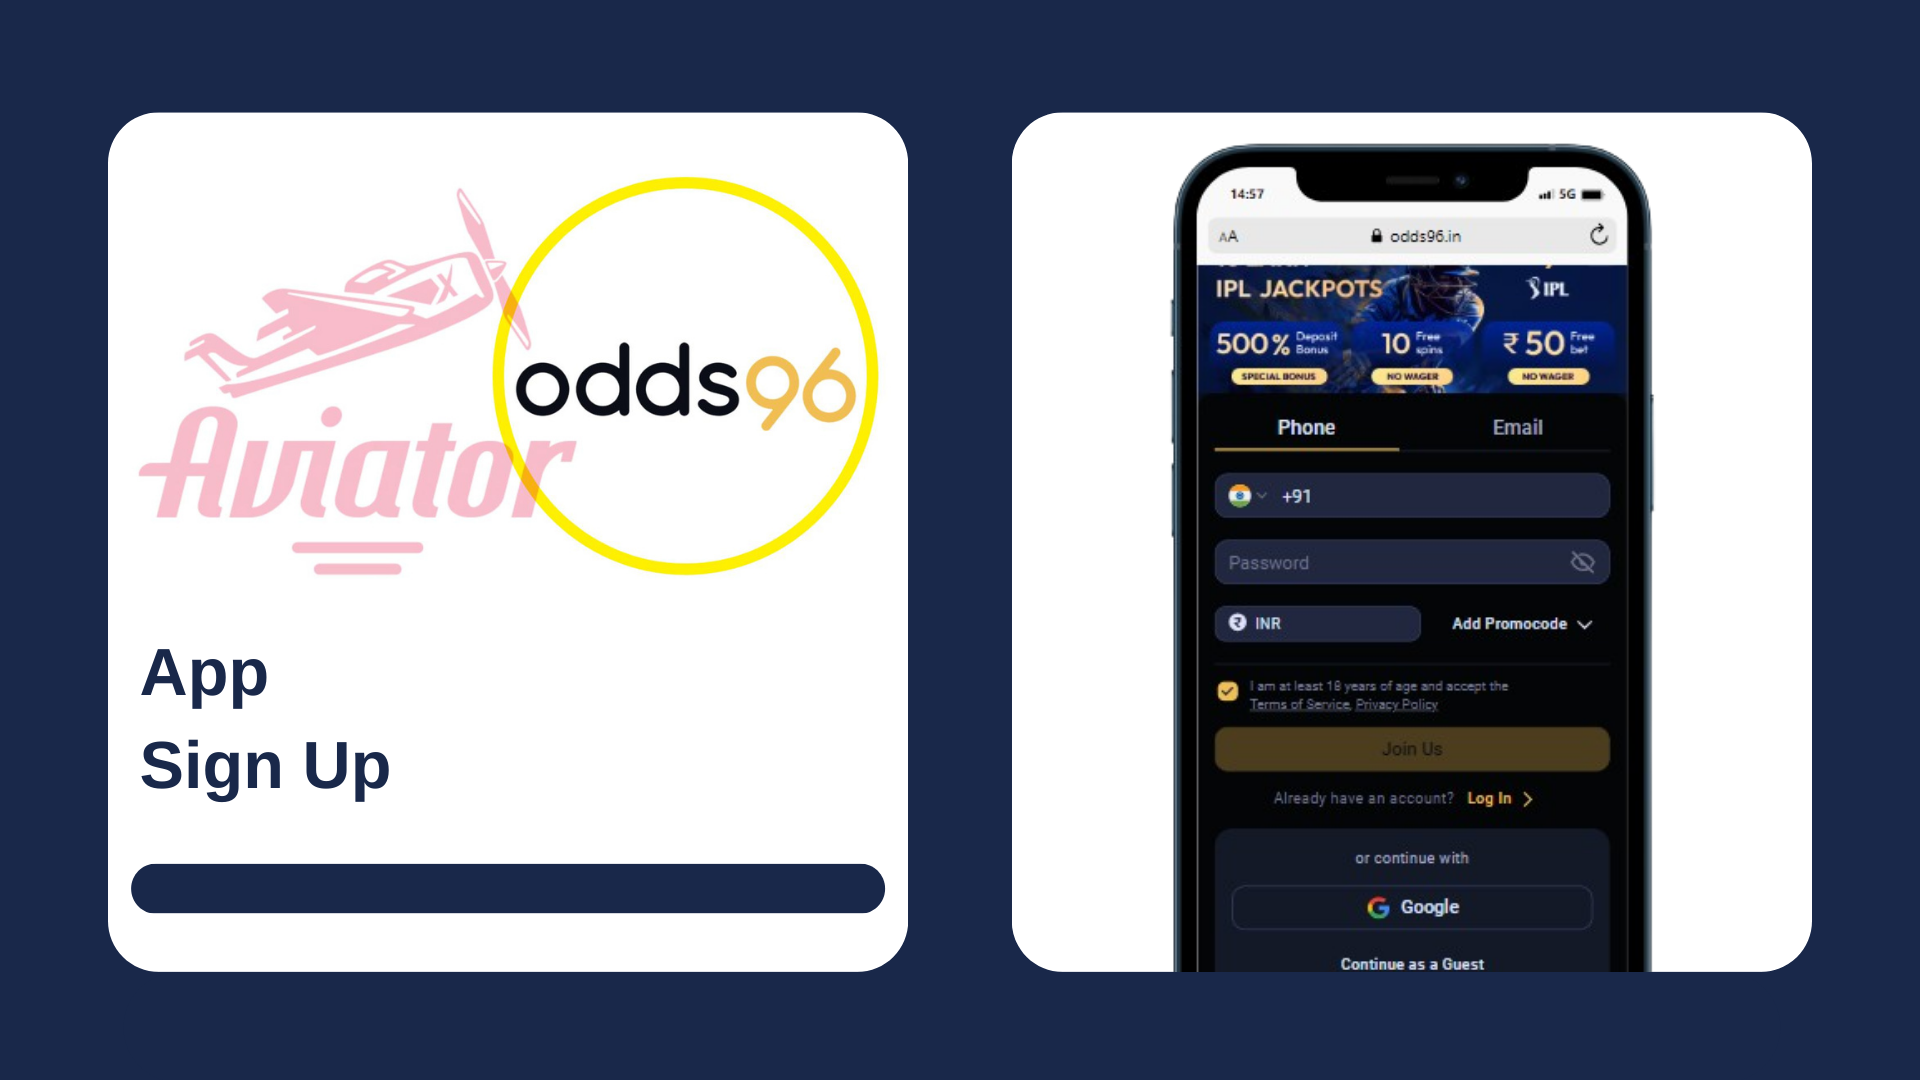 A smartphone showing registration form of the casino, with Aviator game and Odds96 logos